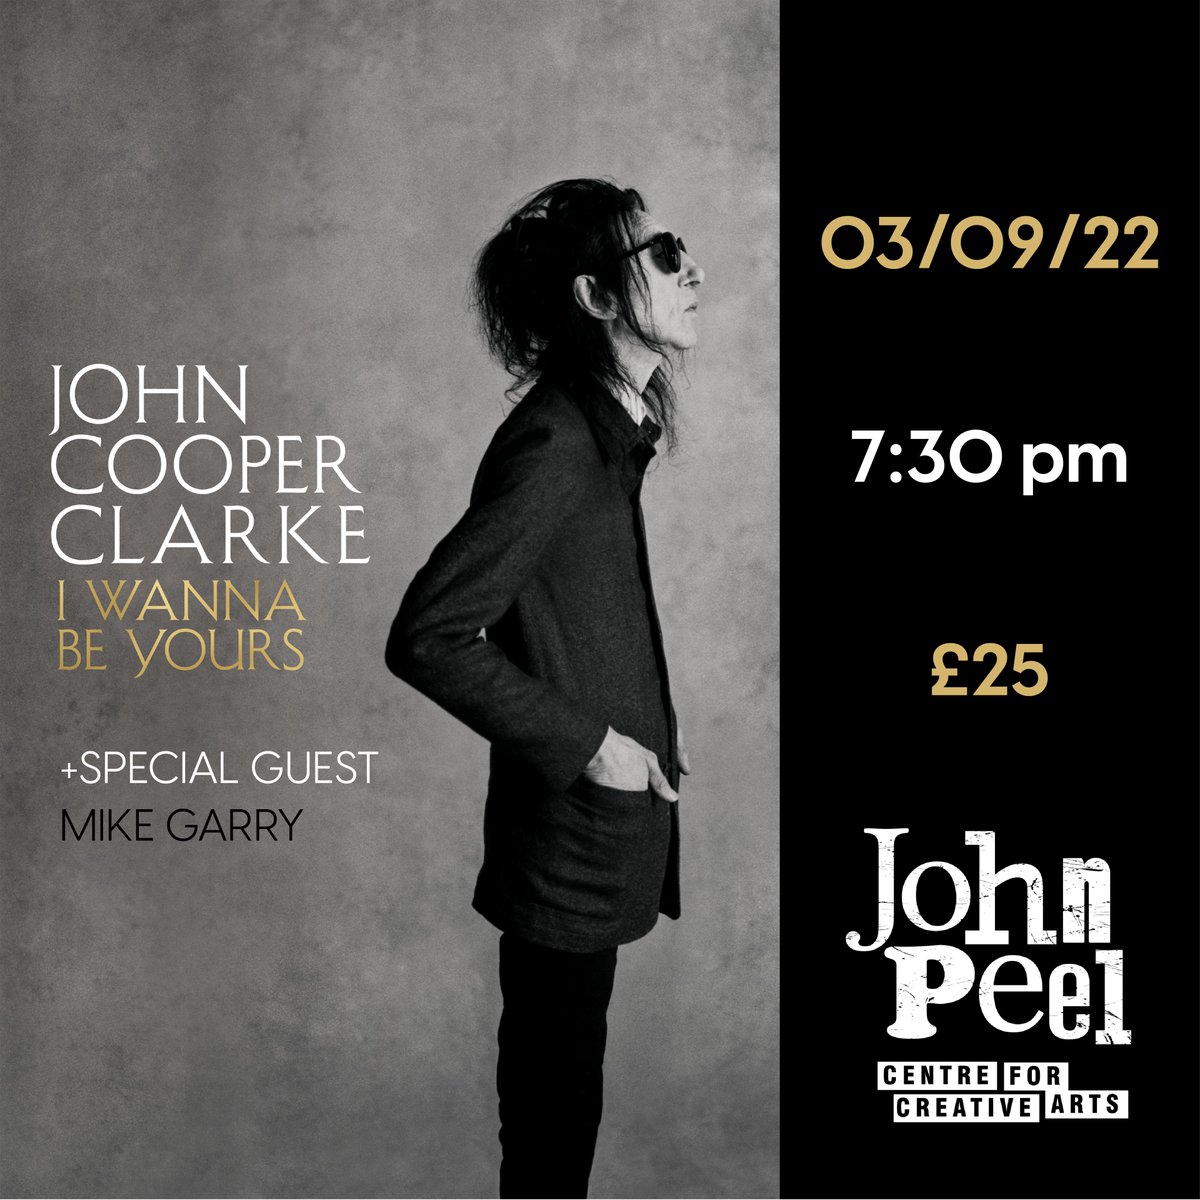 Tickets have just gone on sale for JOHN COOPER CLARKE !! @official_jcc Saturday 3rd September with special guest @mikegarry Seated event - early booking recommended ! johnpeelcentre.com/event/john-coo… #Suffolk #Poetry #JohnCooperClarke #PunkPoet #ThePeoplesPoet #JohnPeelCentre